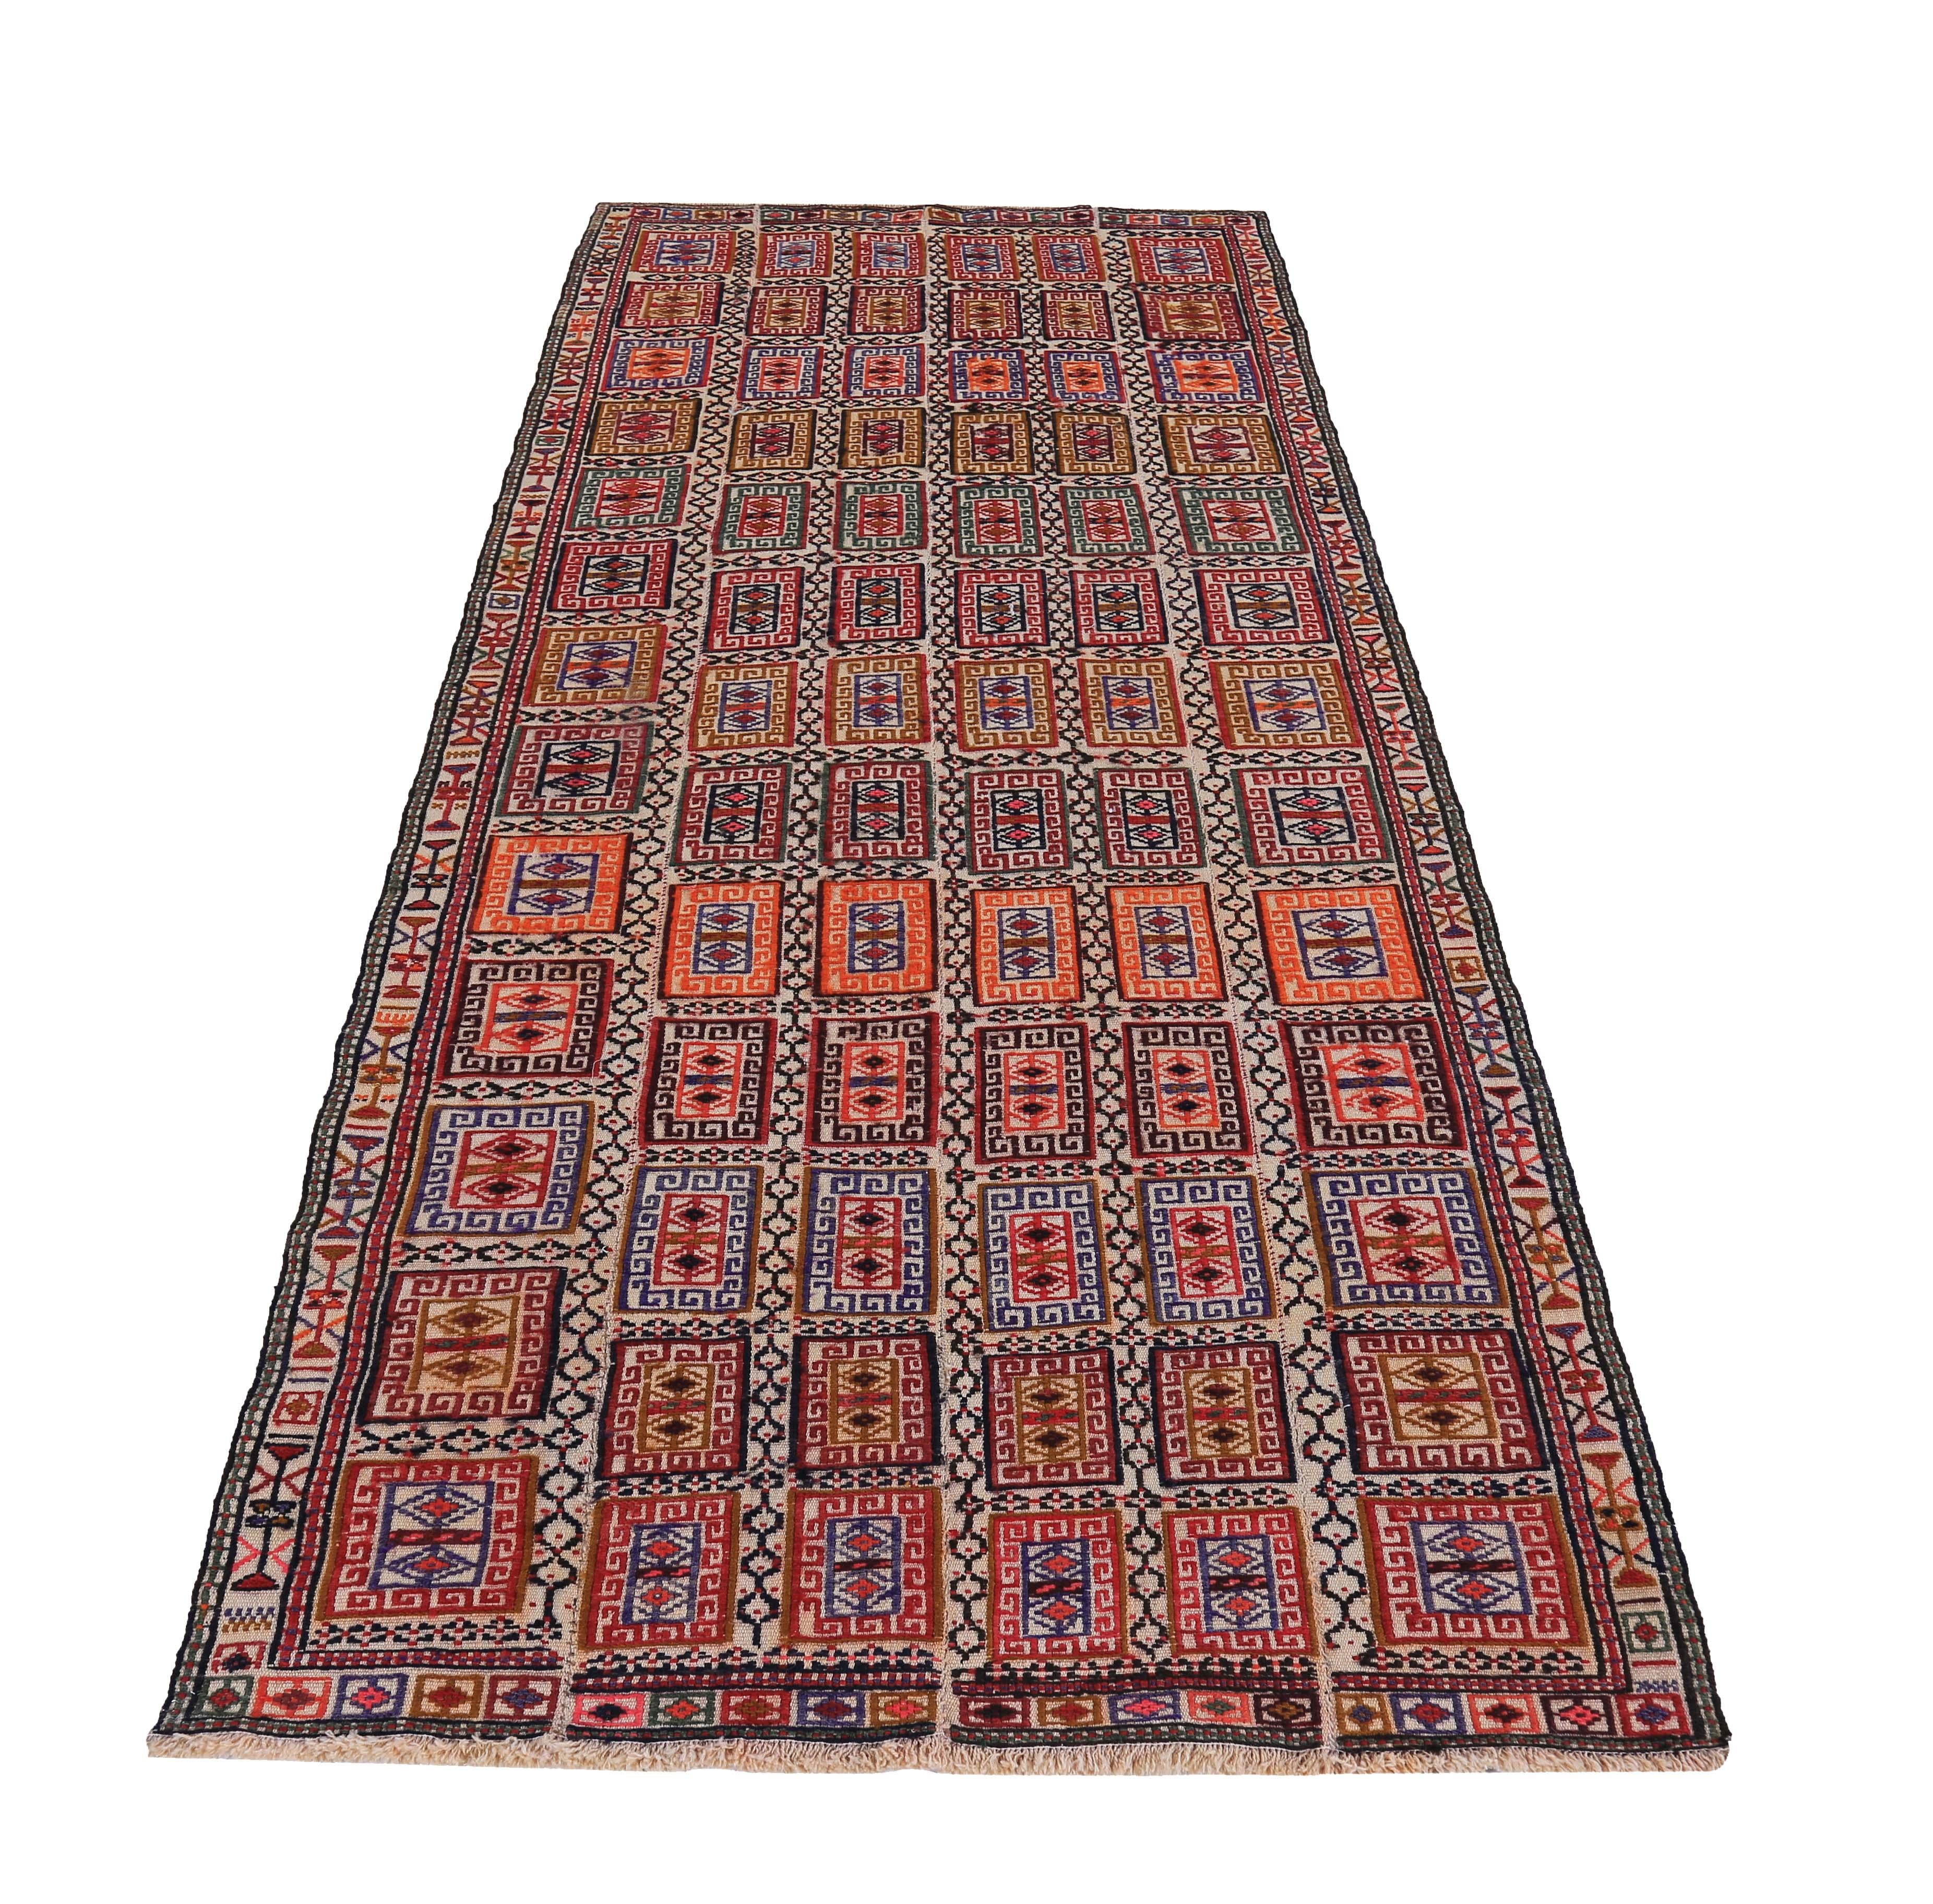 Turkish rug handwoven from the finest sheep’s wool and colored with all-natural vegetable dyes that are safe for humans and pets. It’s a traditional Kilim flat-weave design featuring red, blue and orange tribal blocks on a beige field. It’s a